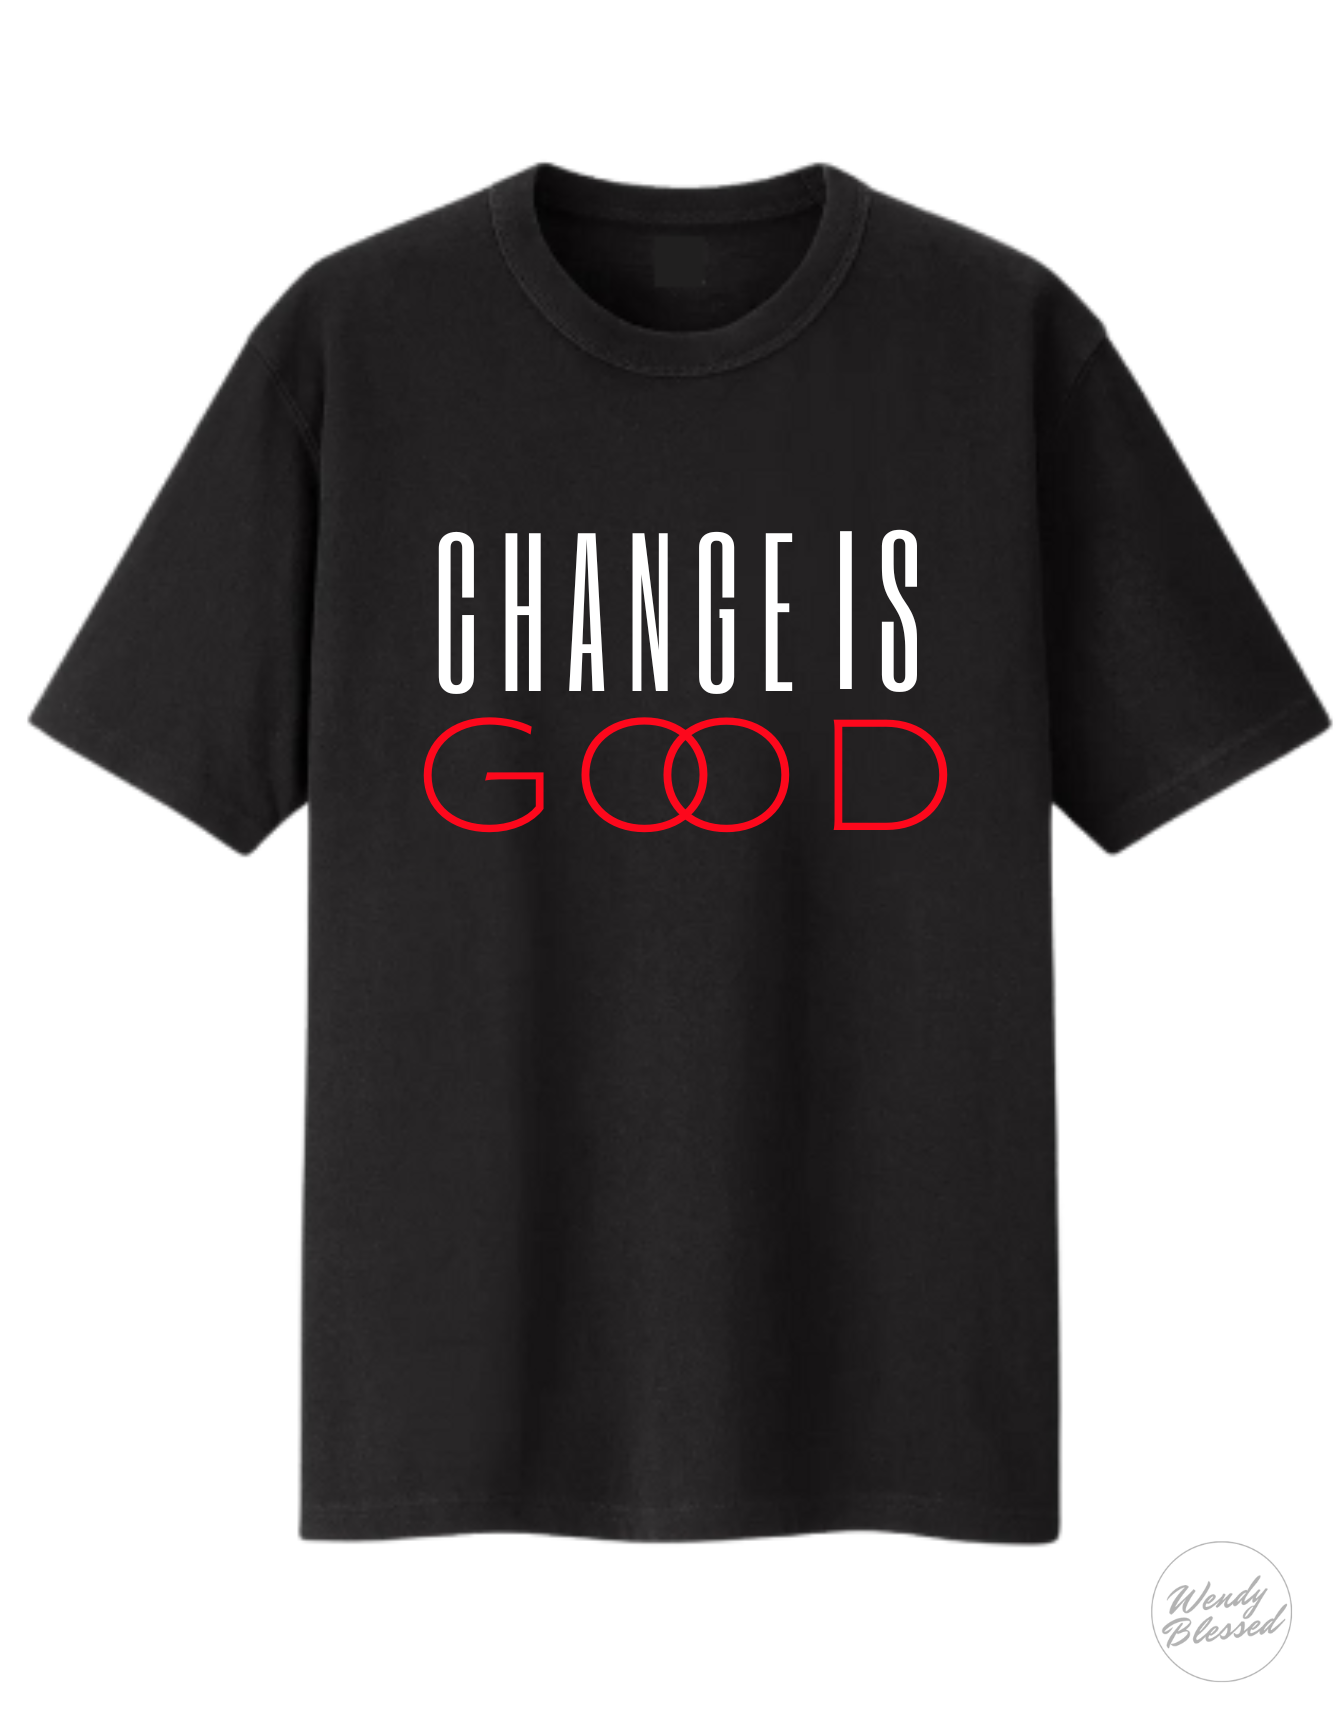 T-Shirt Round Neck with Change is Good design.